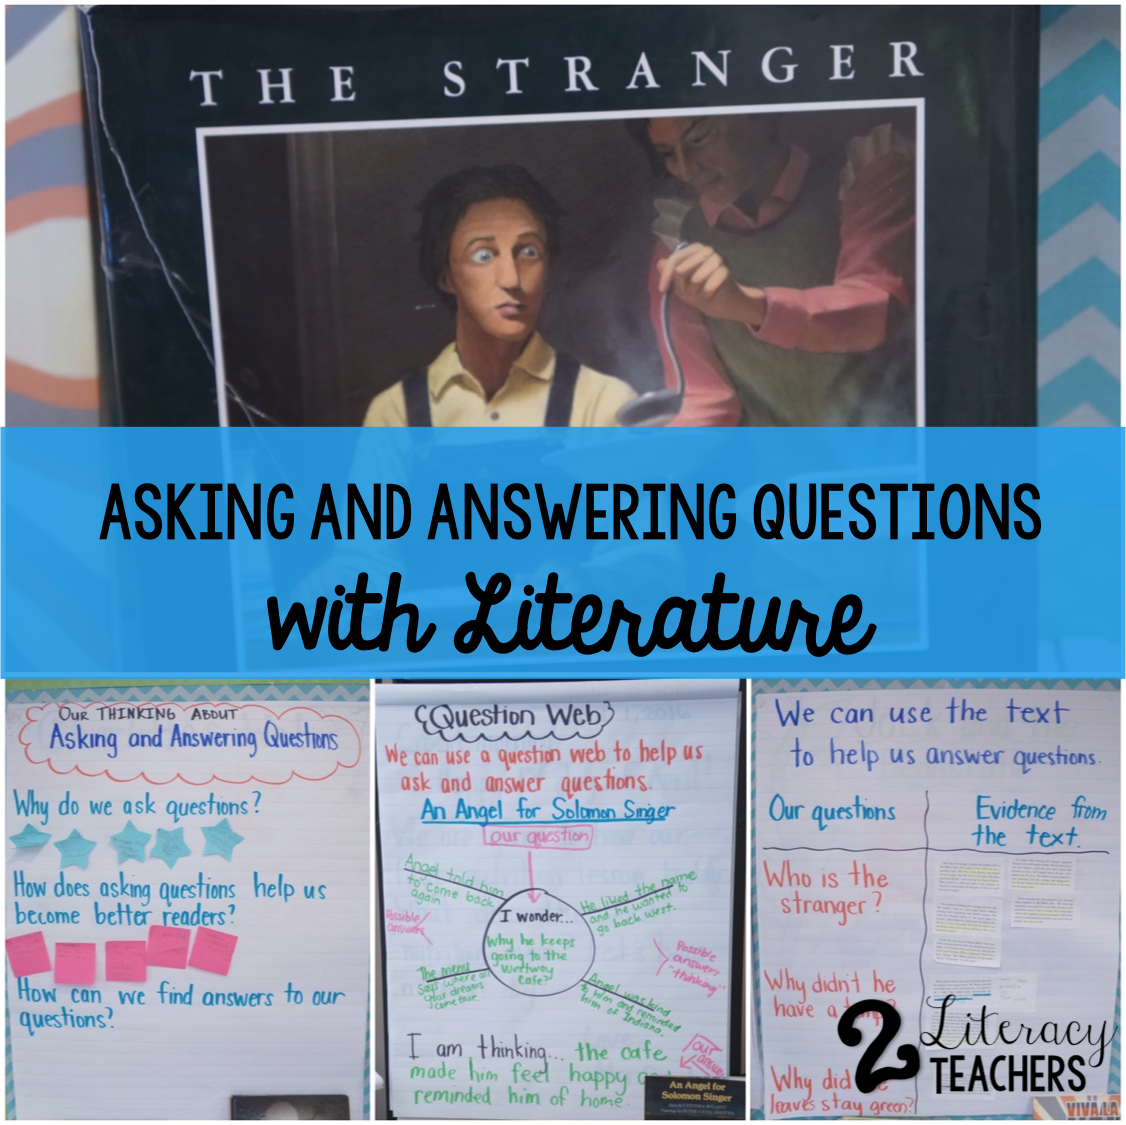 Let’s Ask and Answer Questions with Literature!